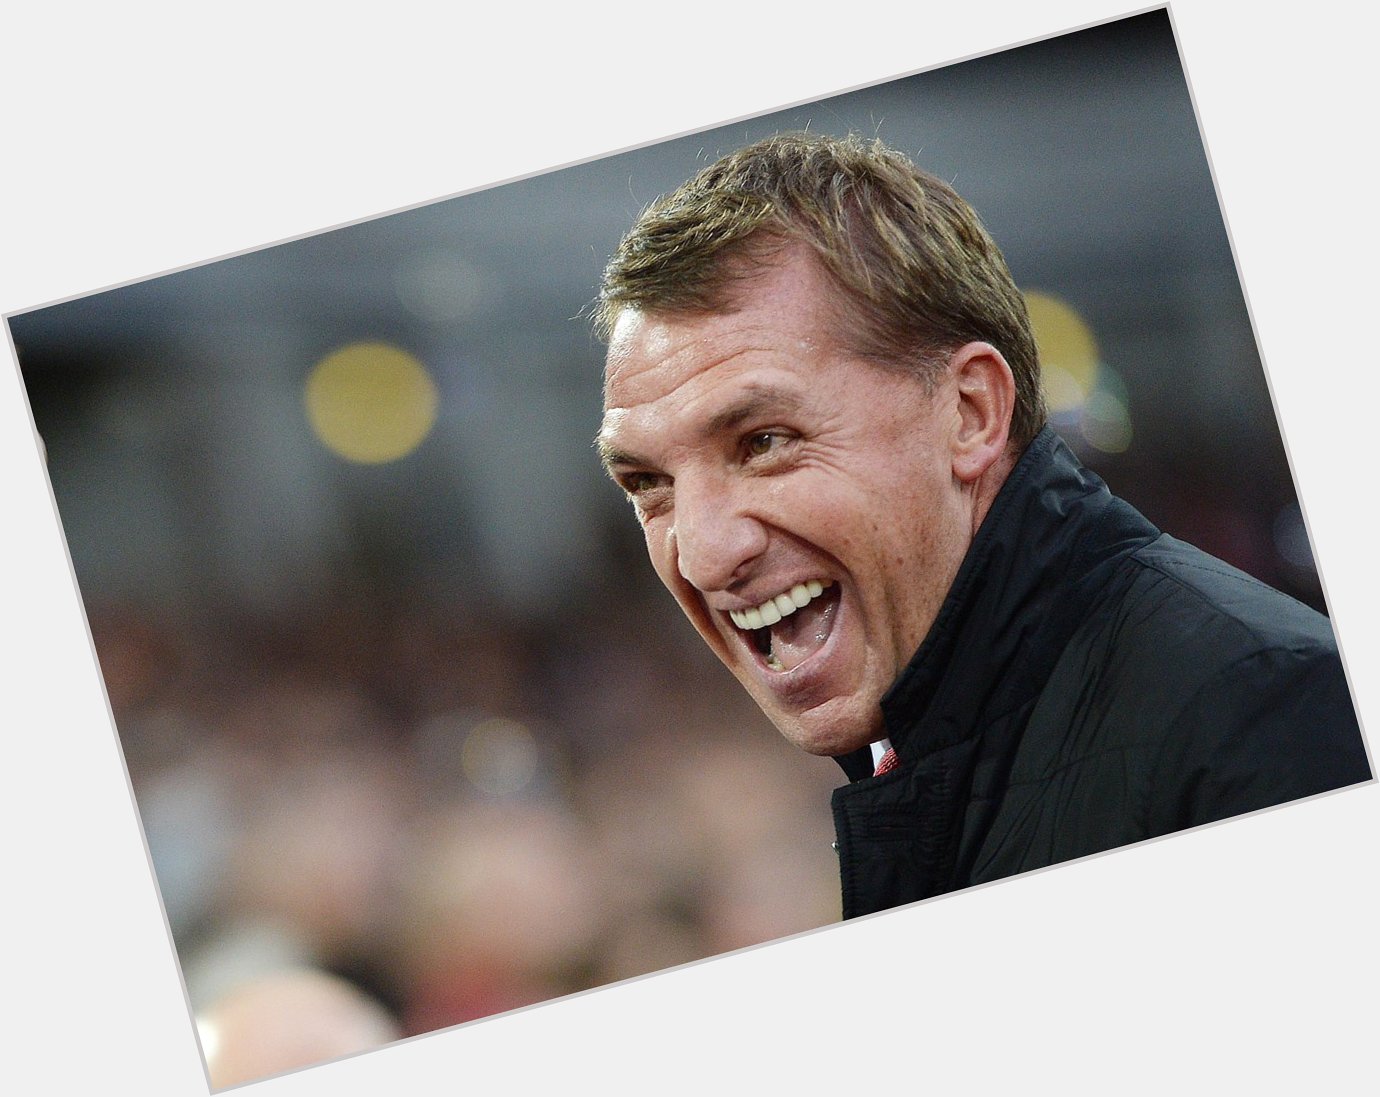 Happy 42nd birthday to Liverpool boss Brendan Rodgers. He won the LMA Manager of the Year award last season. 